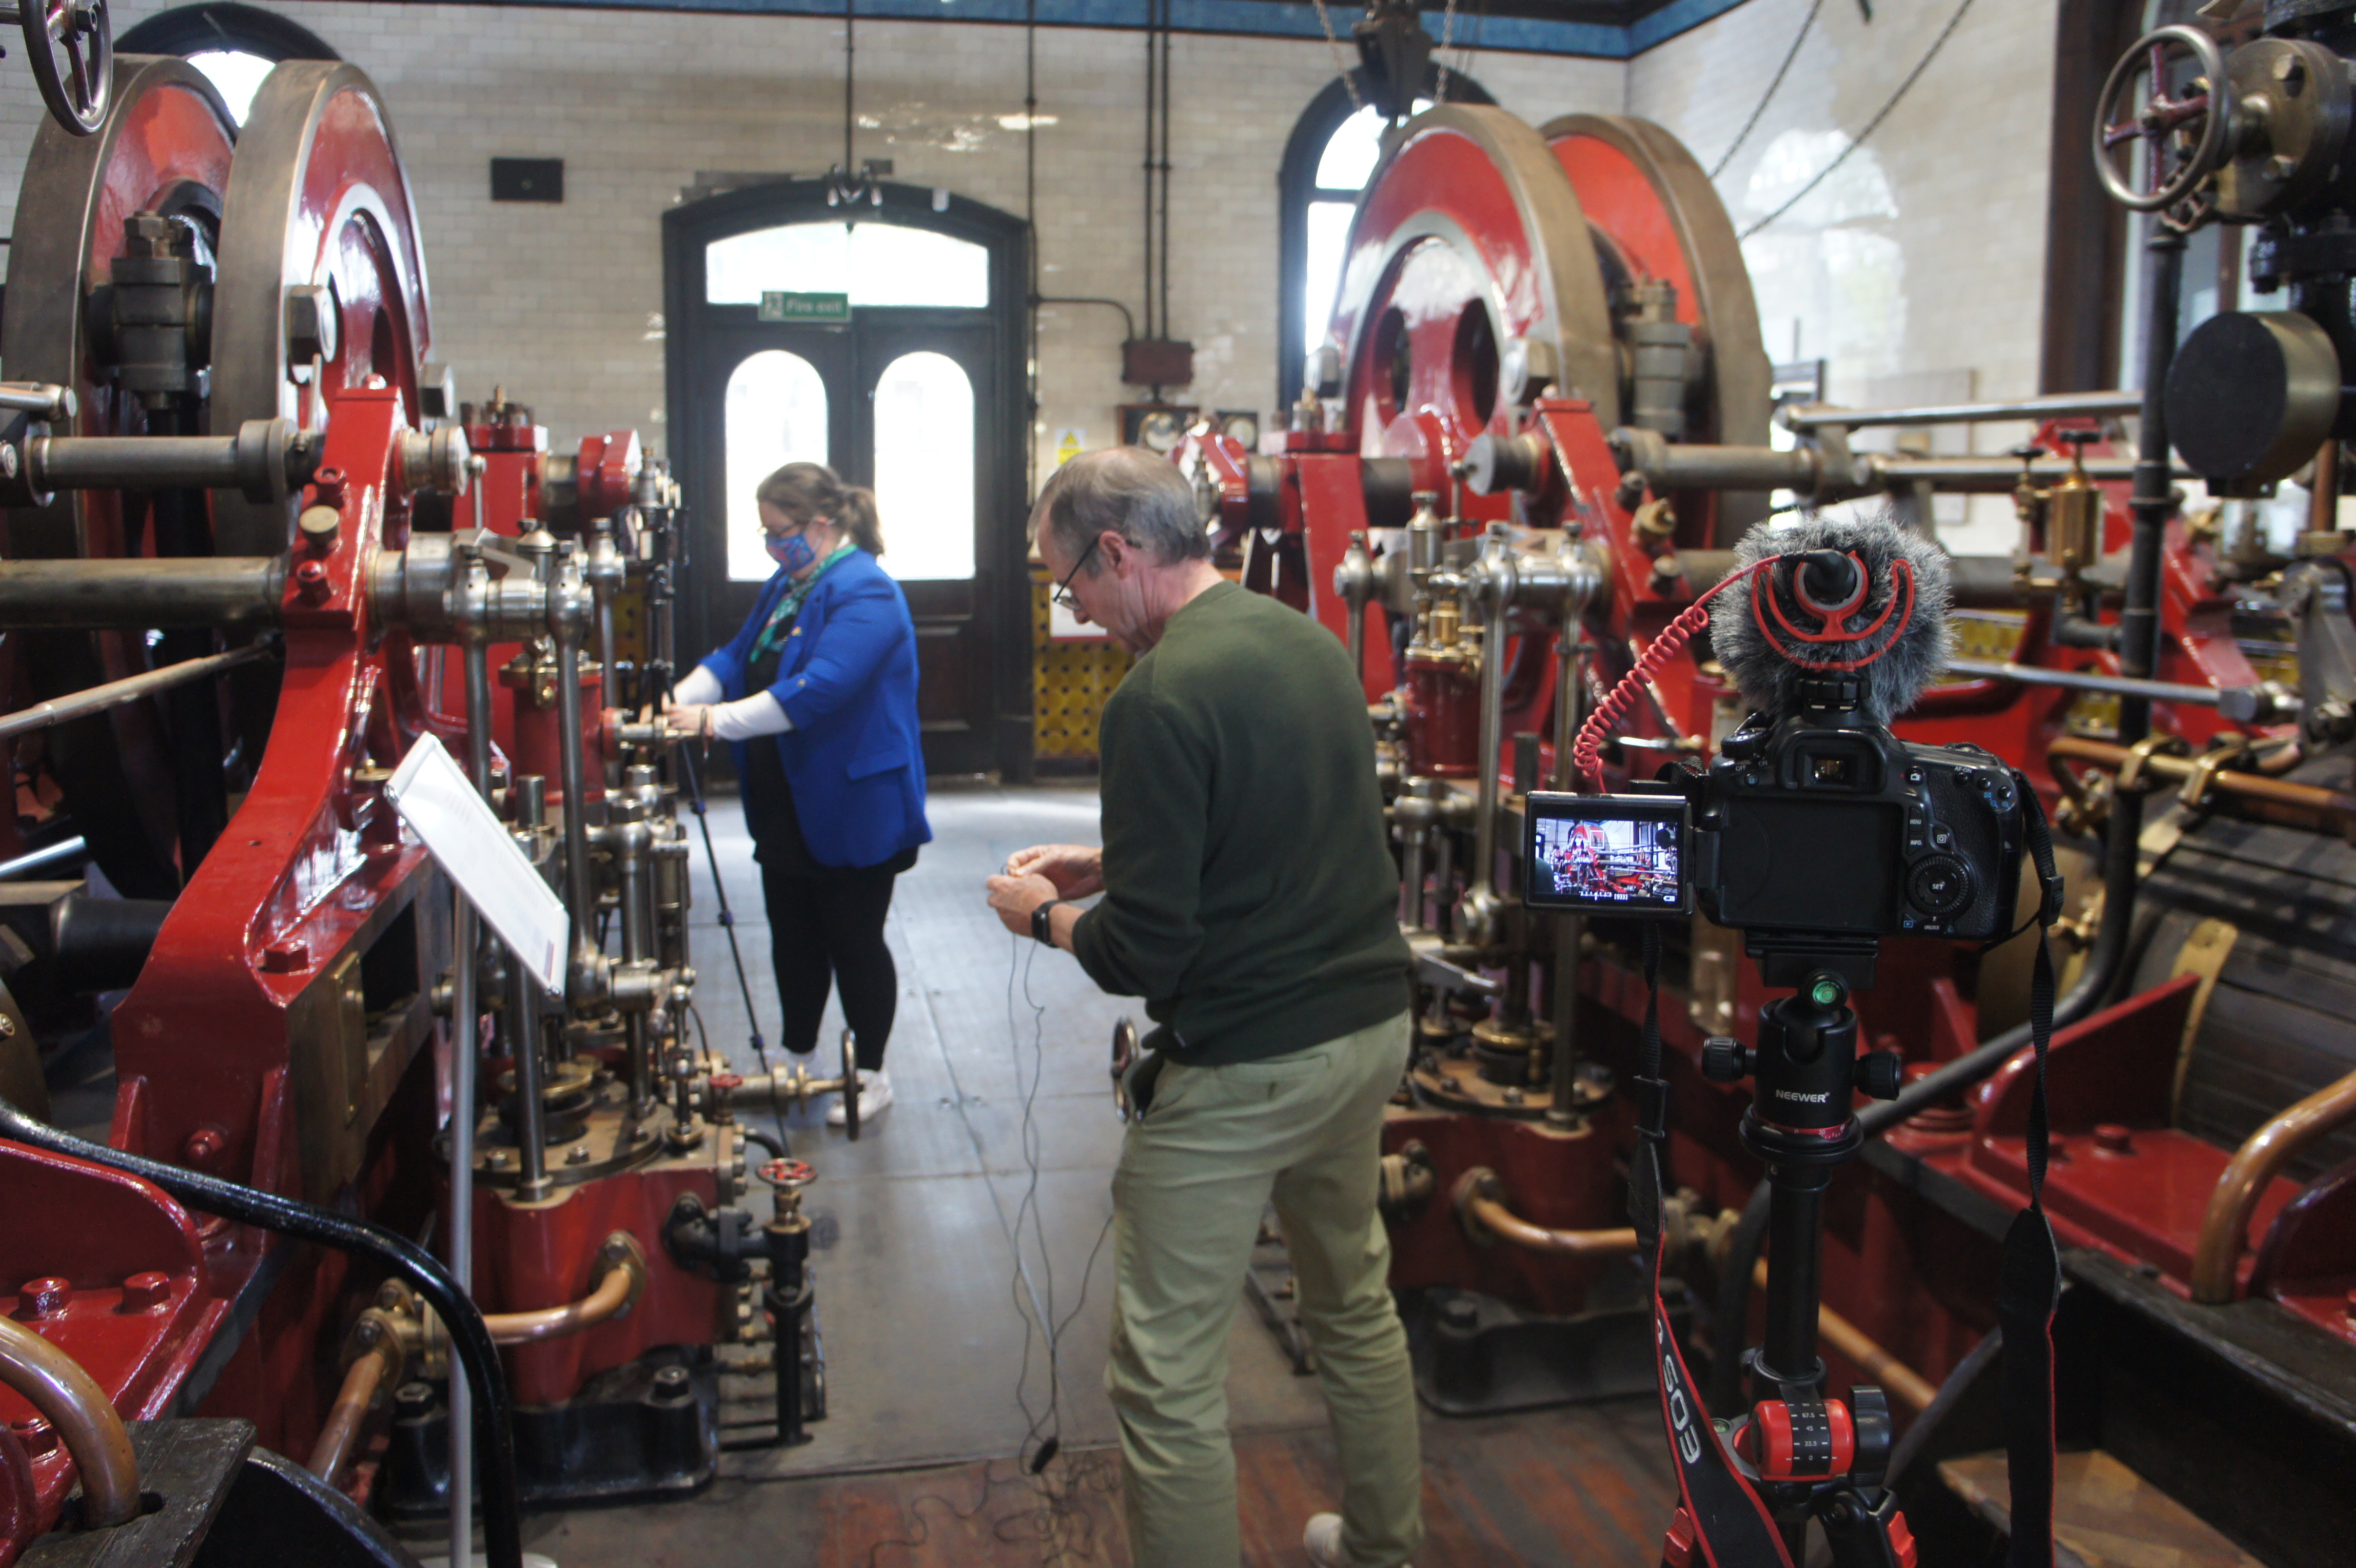 A man and woman in a gallery of industrial machinery